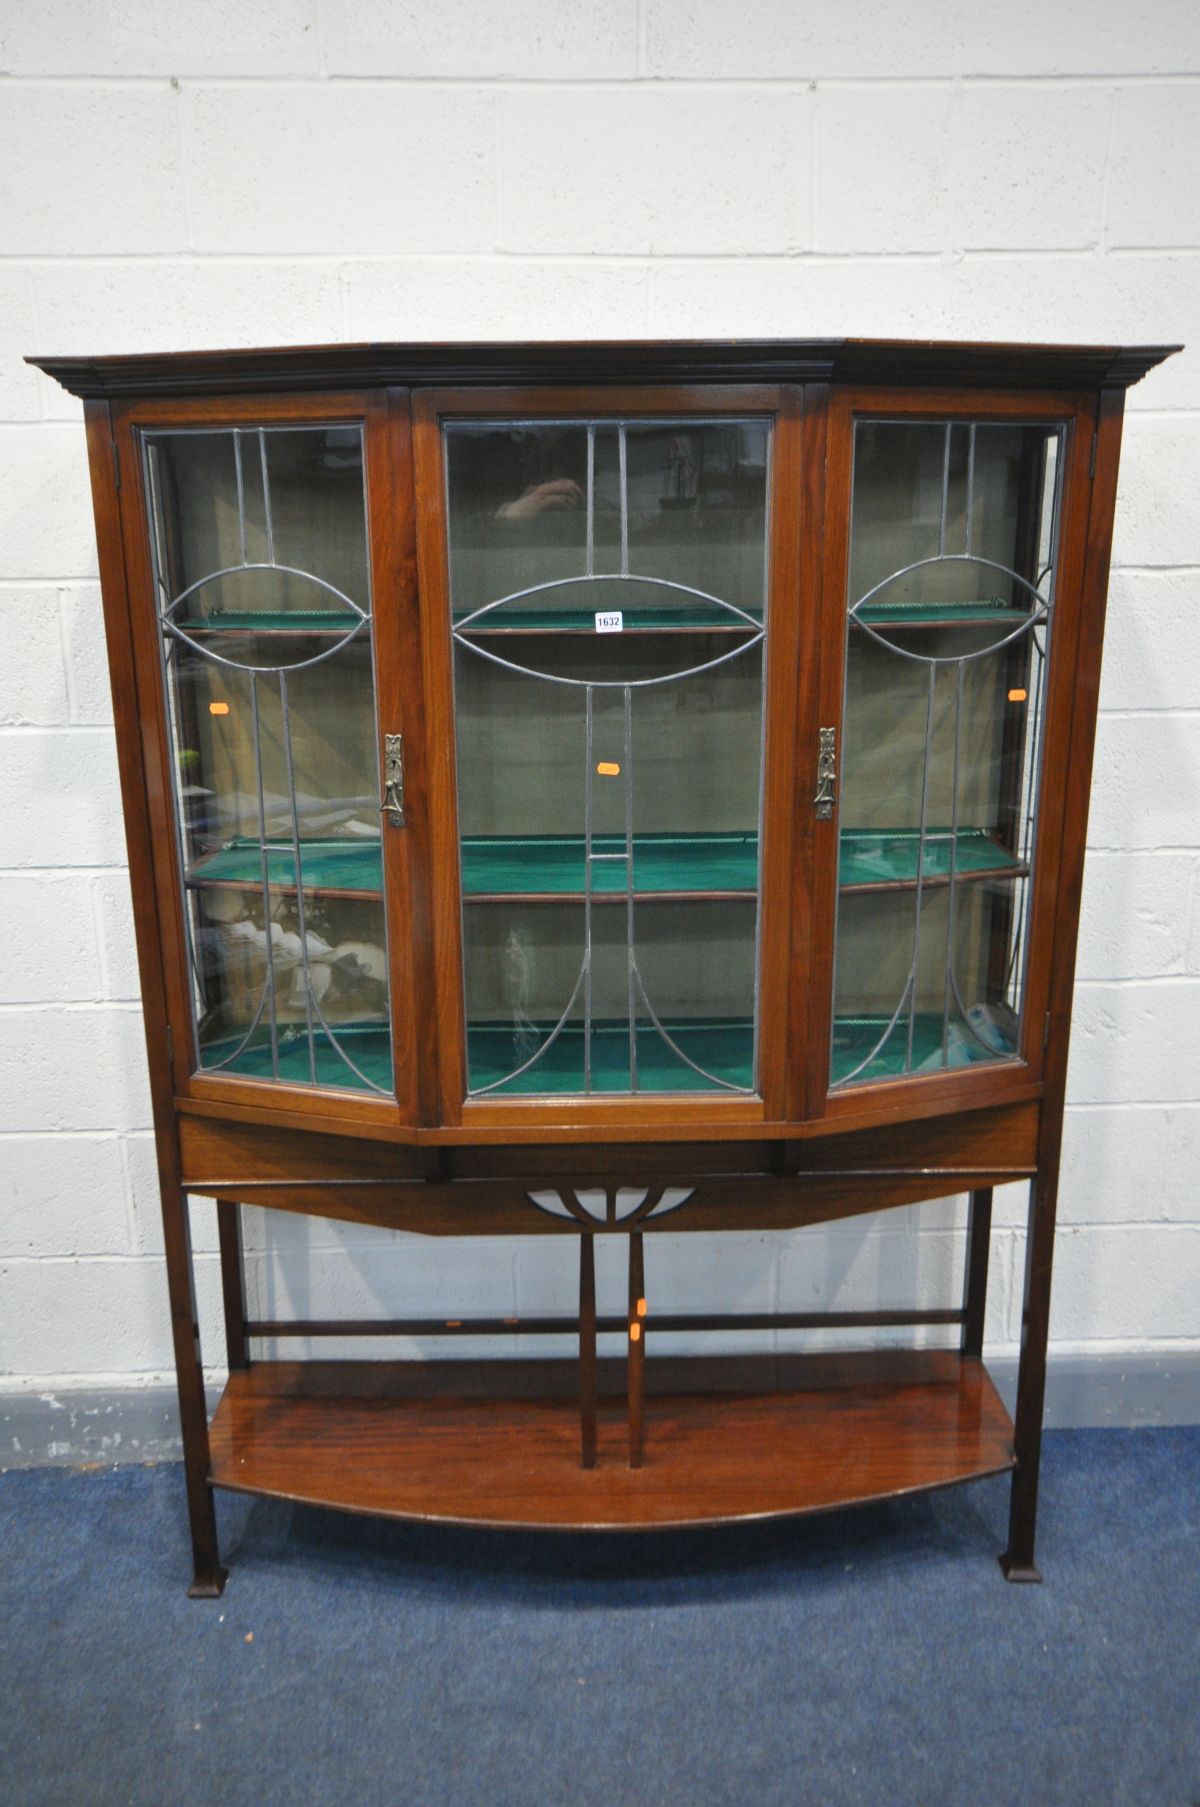 AN ARTS AND CRAFTS MAHOGANY DISPLAY CABINET, in the manner of Shapland and Petter of Barnstable, Art